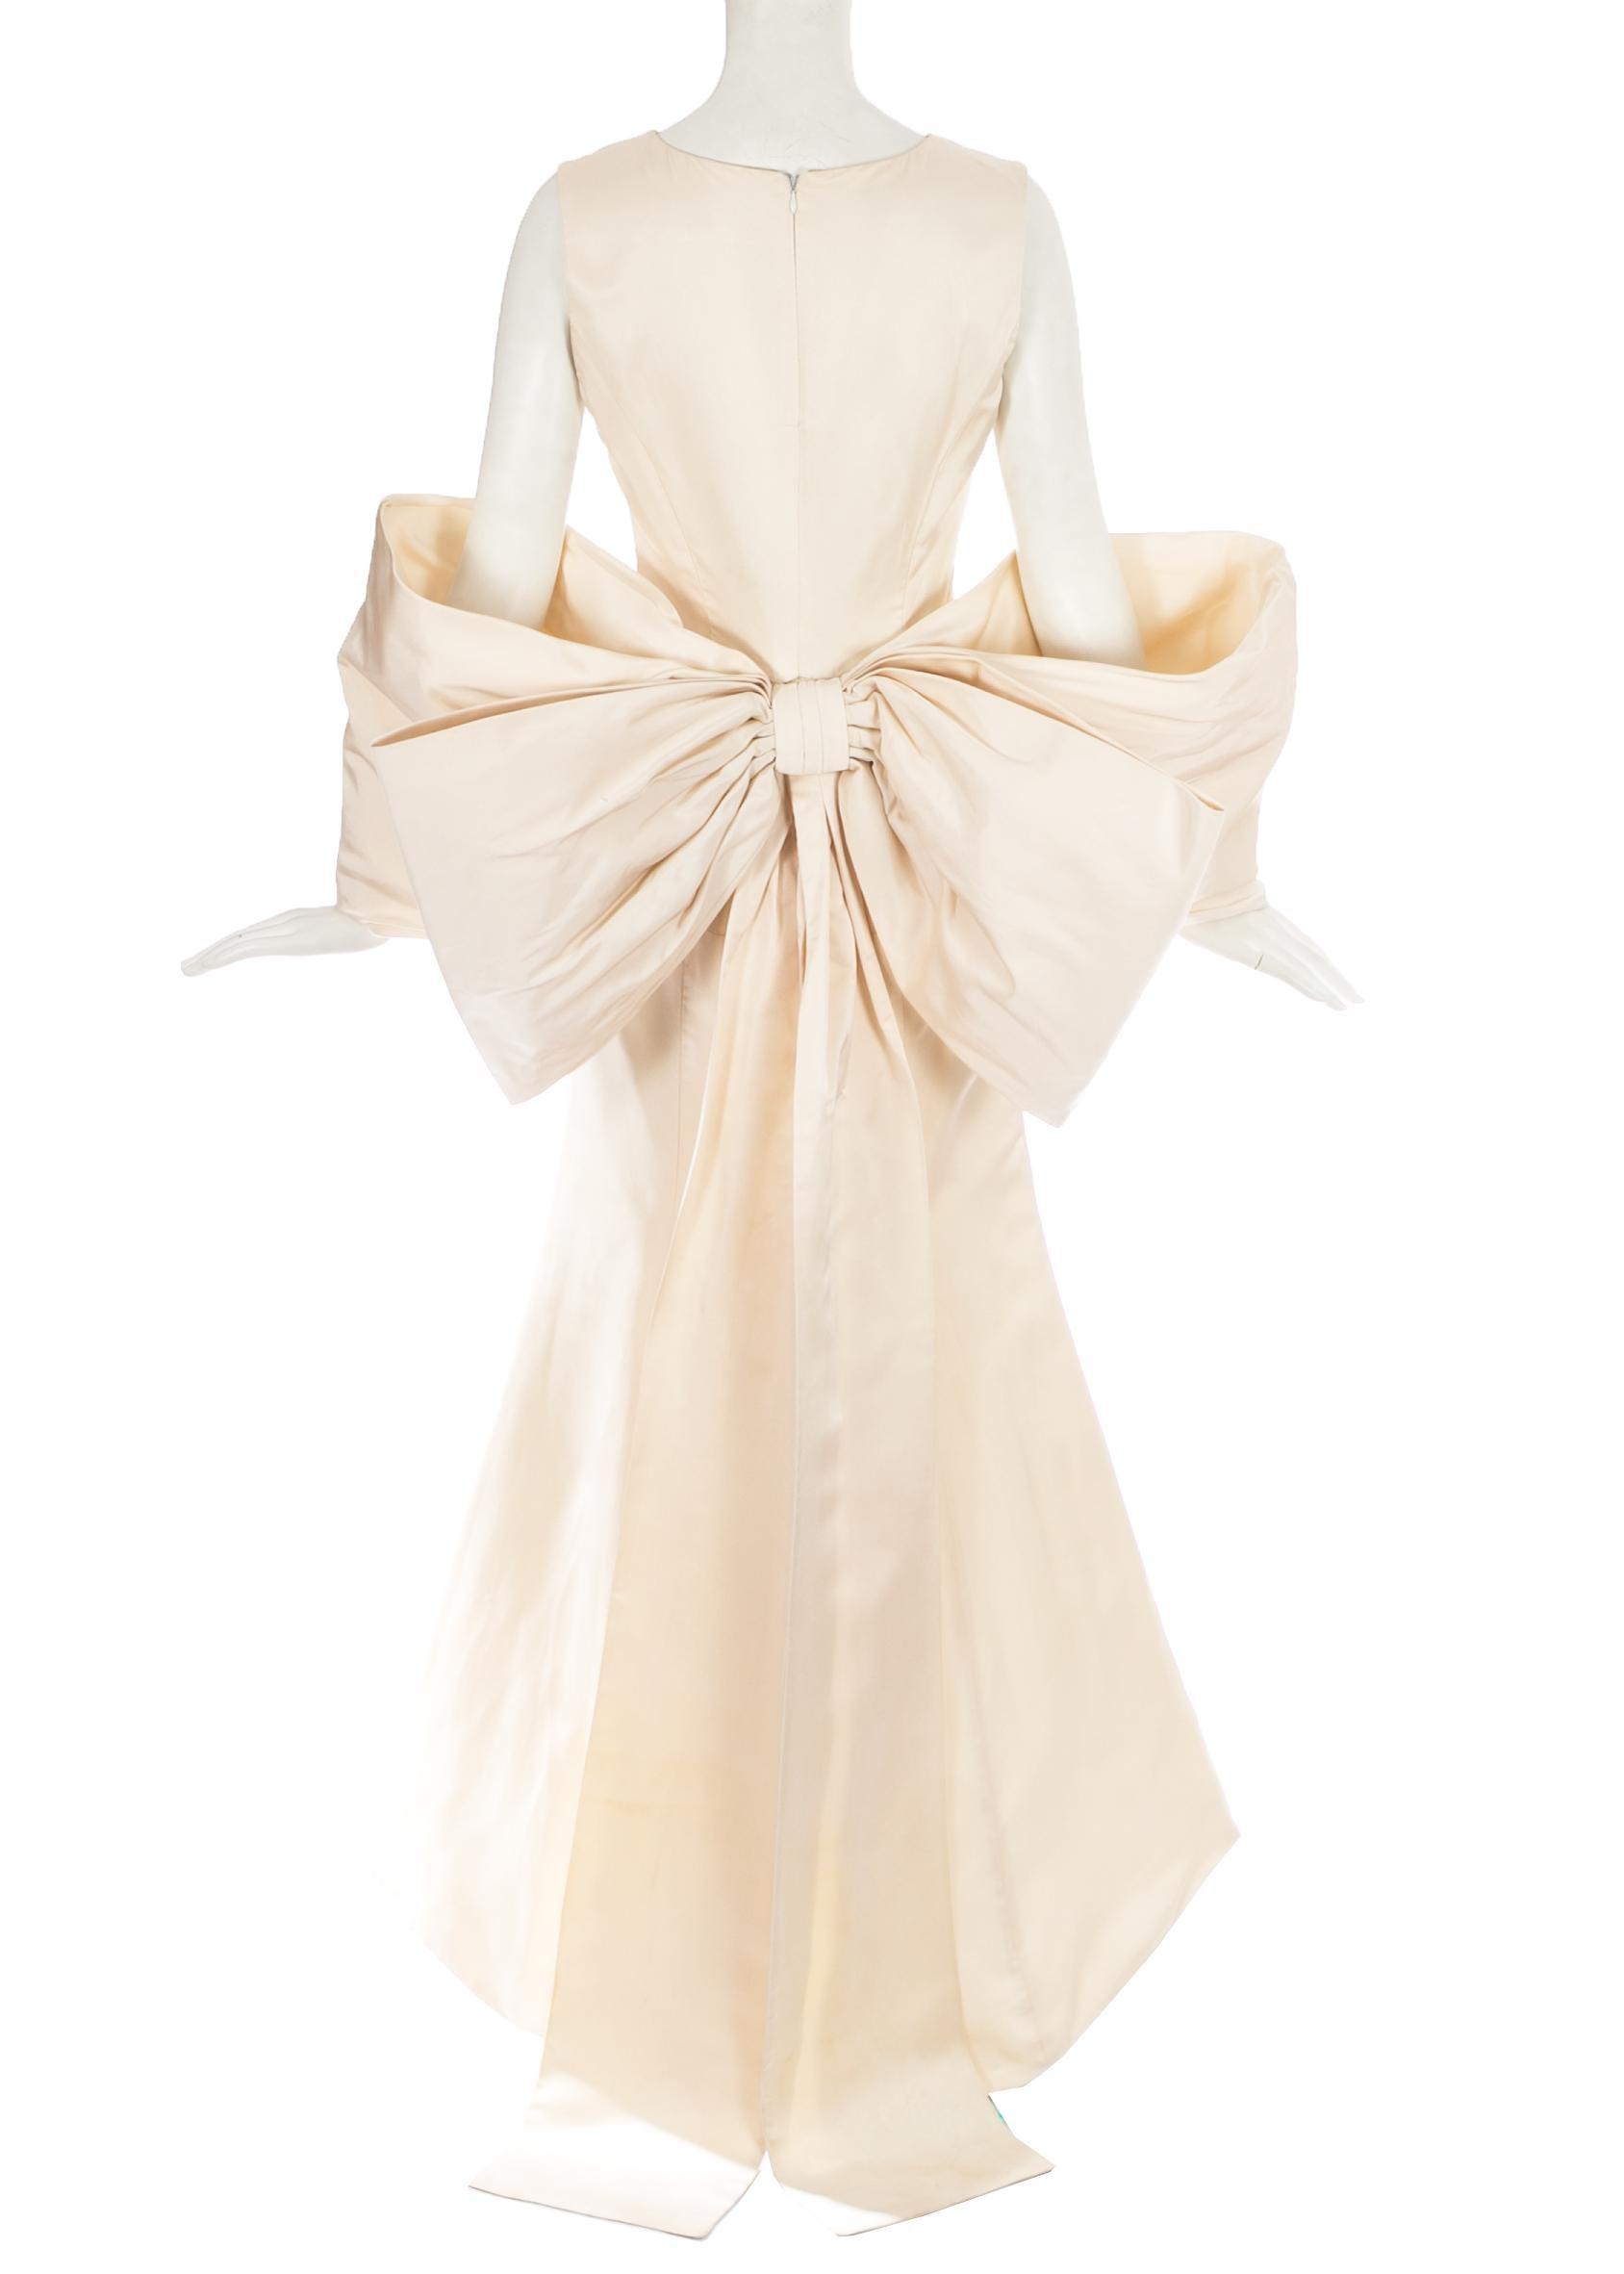 Dolce & Gabbana ivory silk fishtail wedding dress with large bow at rear

c. 1990s